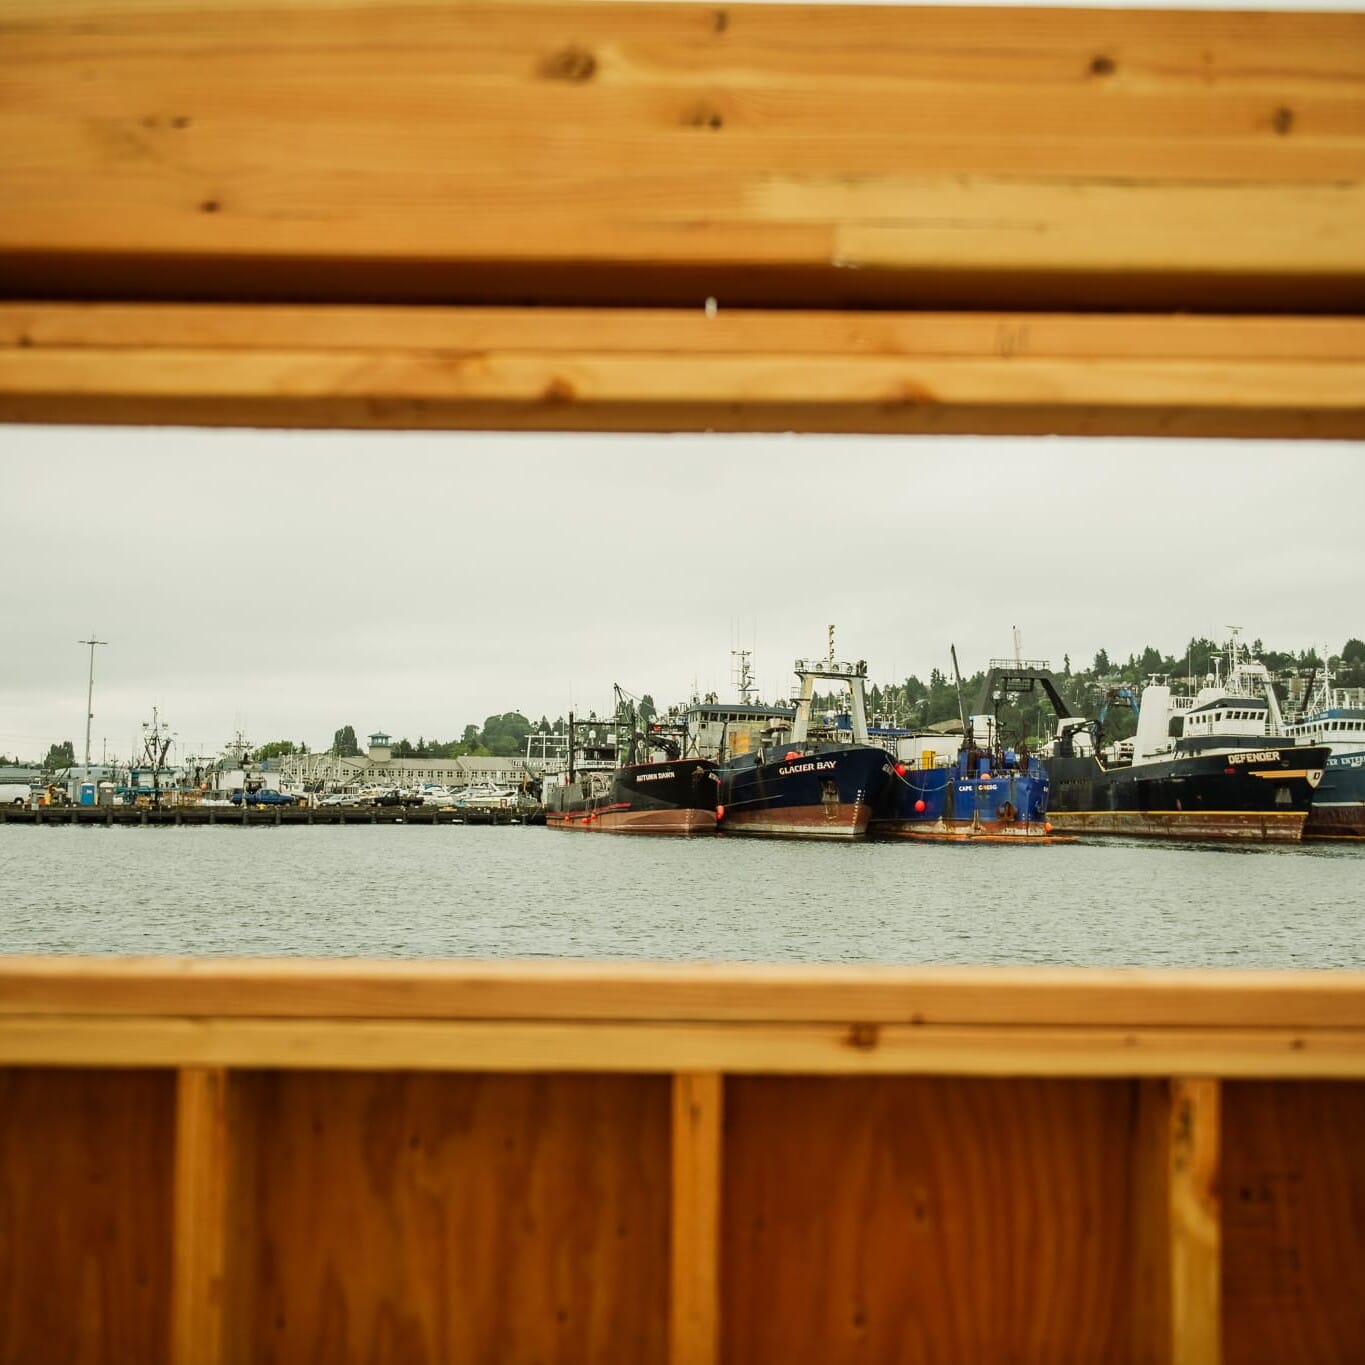 A picturesque view of a harbor from a beautifully crafted wooden building, brought to you by Seattle Floating Homes - the leading floating home builder and contractor.